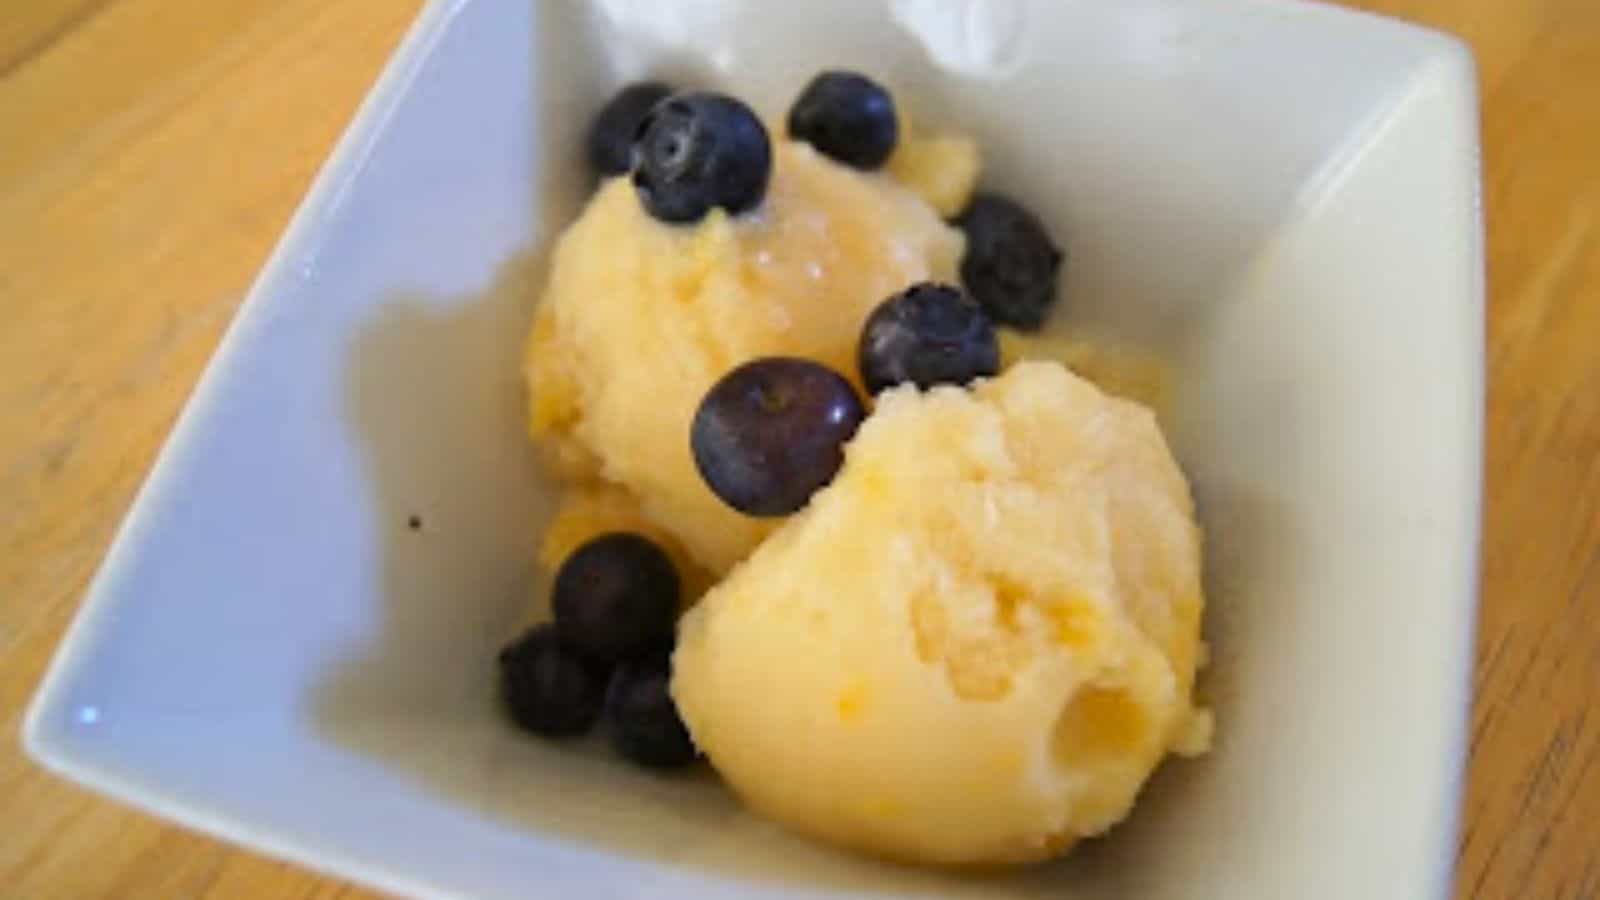 Image shows scoops of Peach Coconut Milk Ice Cream in a white bowl with blueberries.